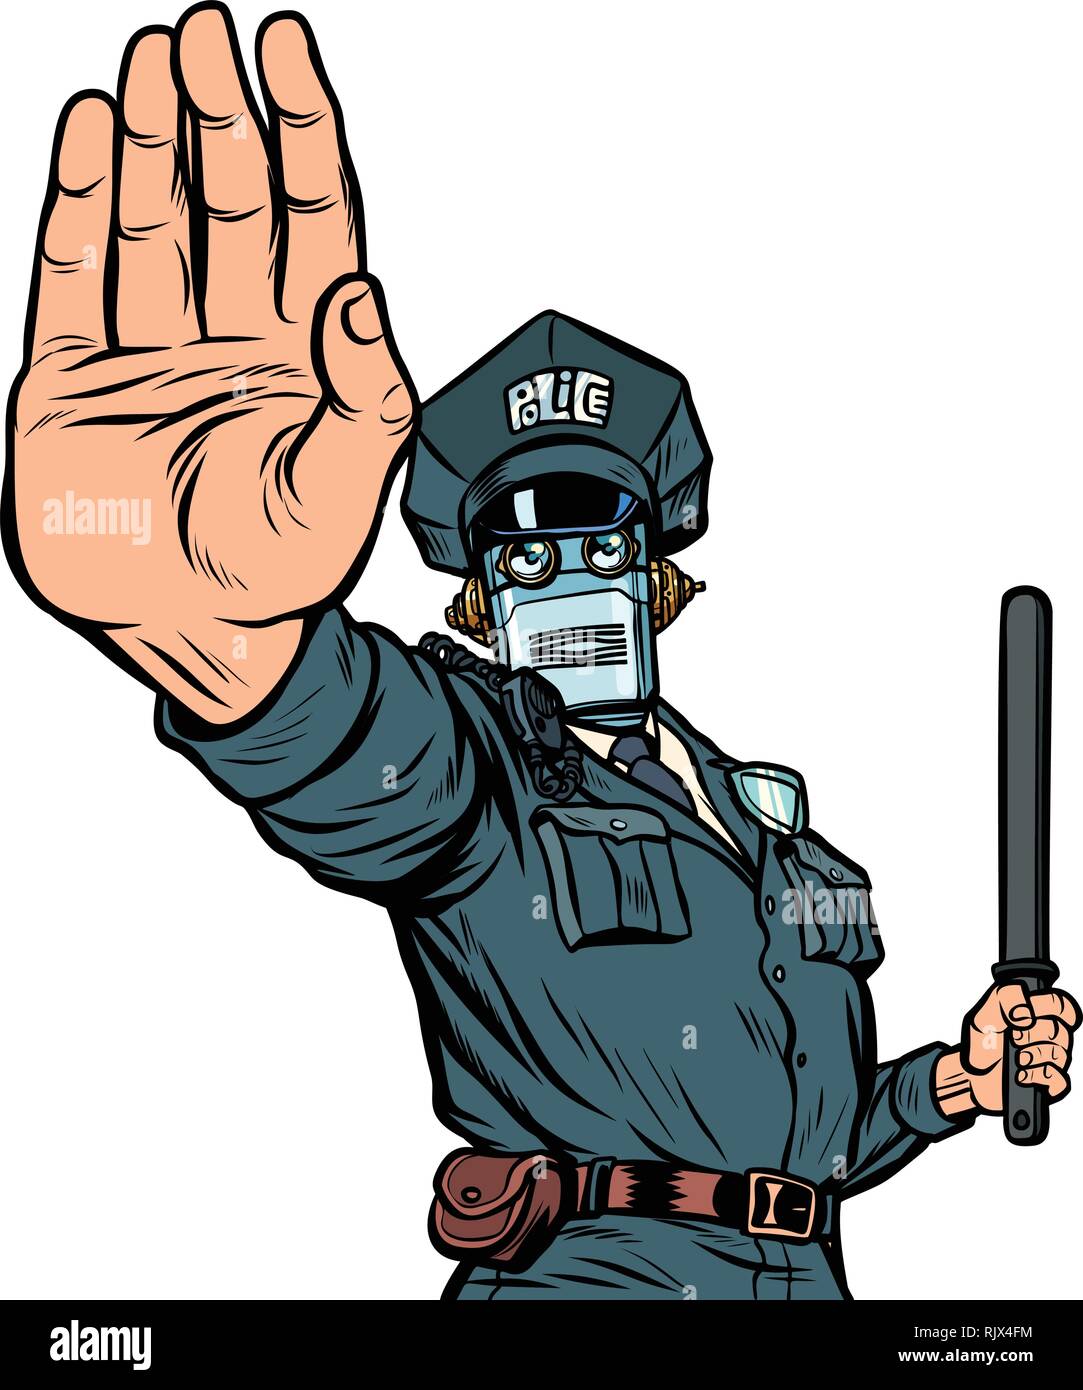 Stop hand gesture. Robot policeman. Isolate on white background Stock Vector